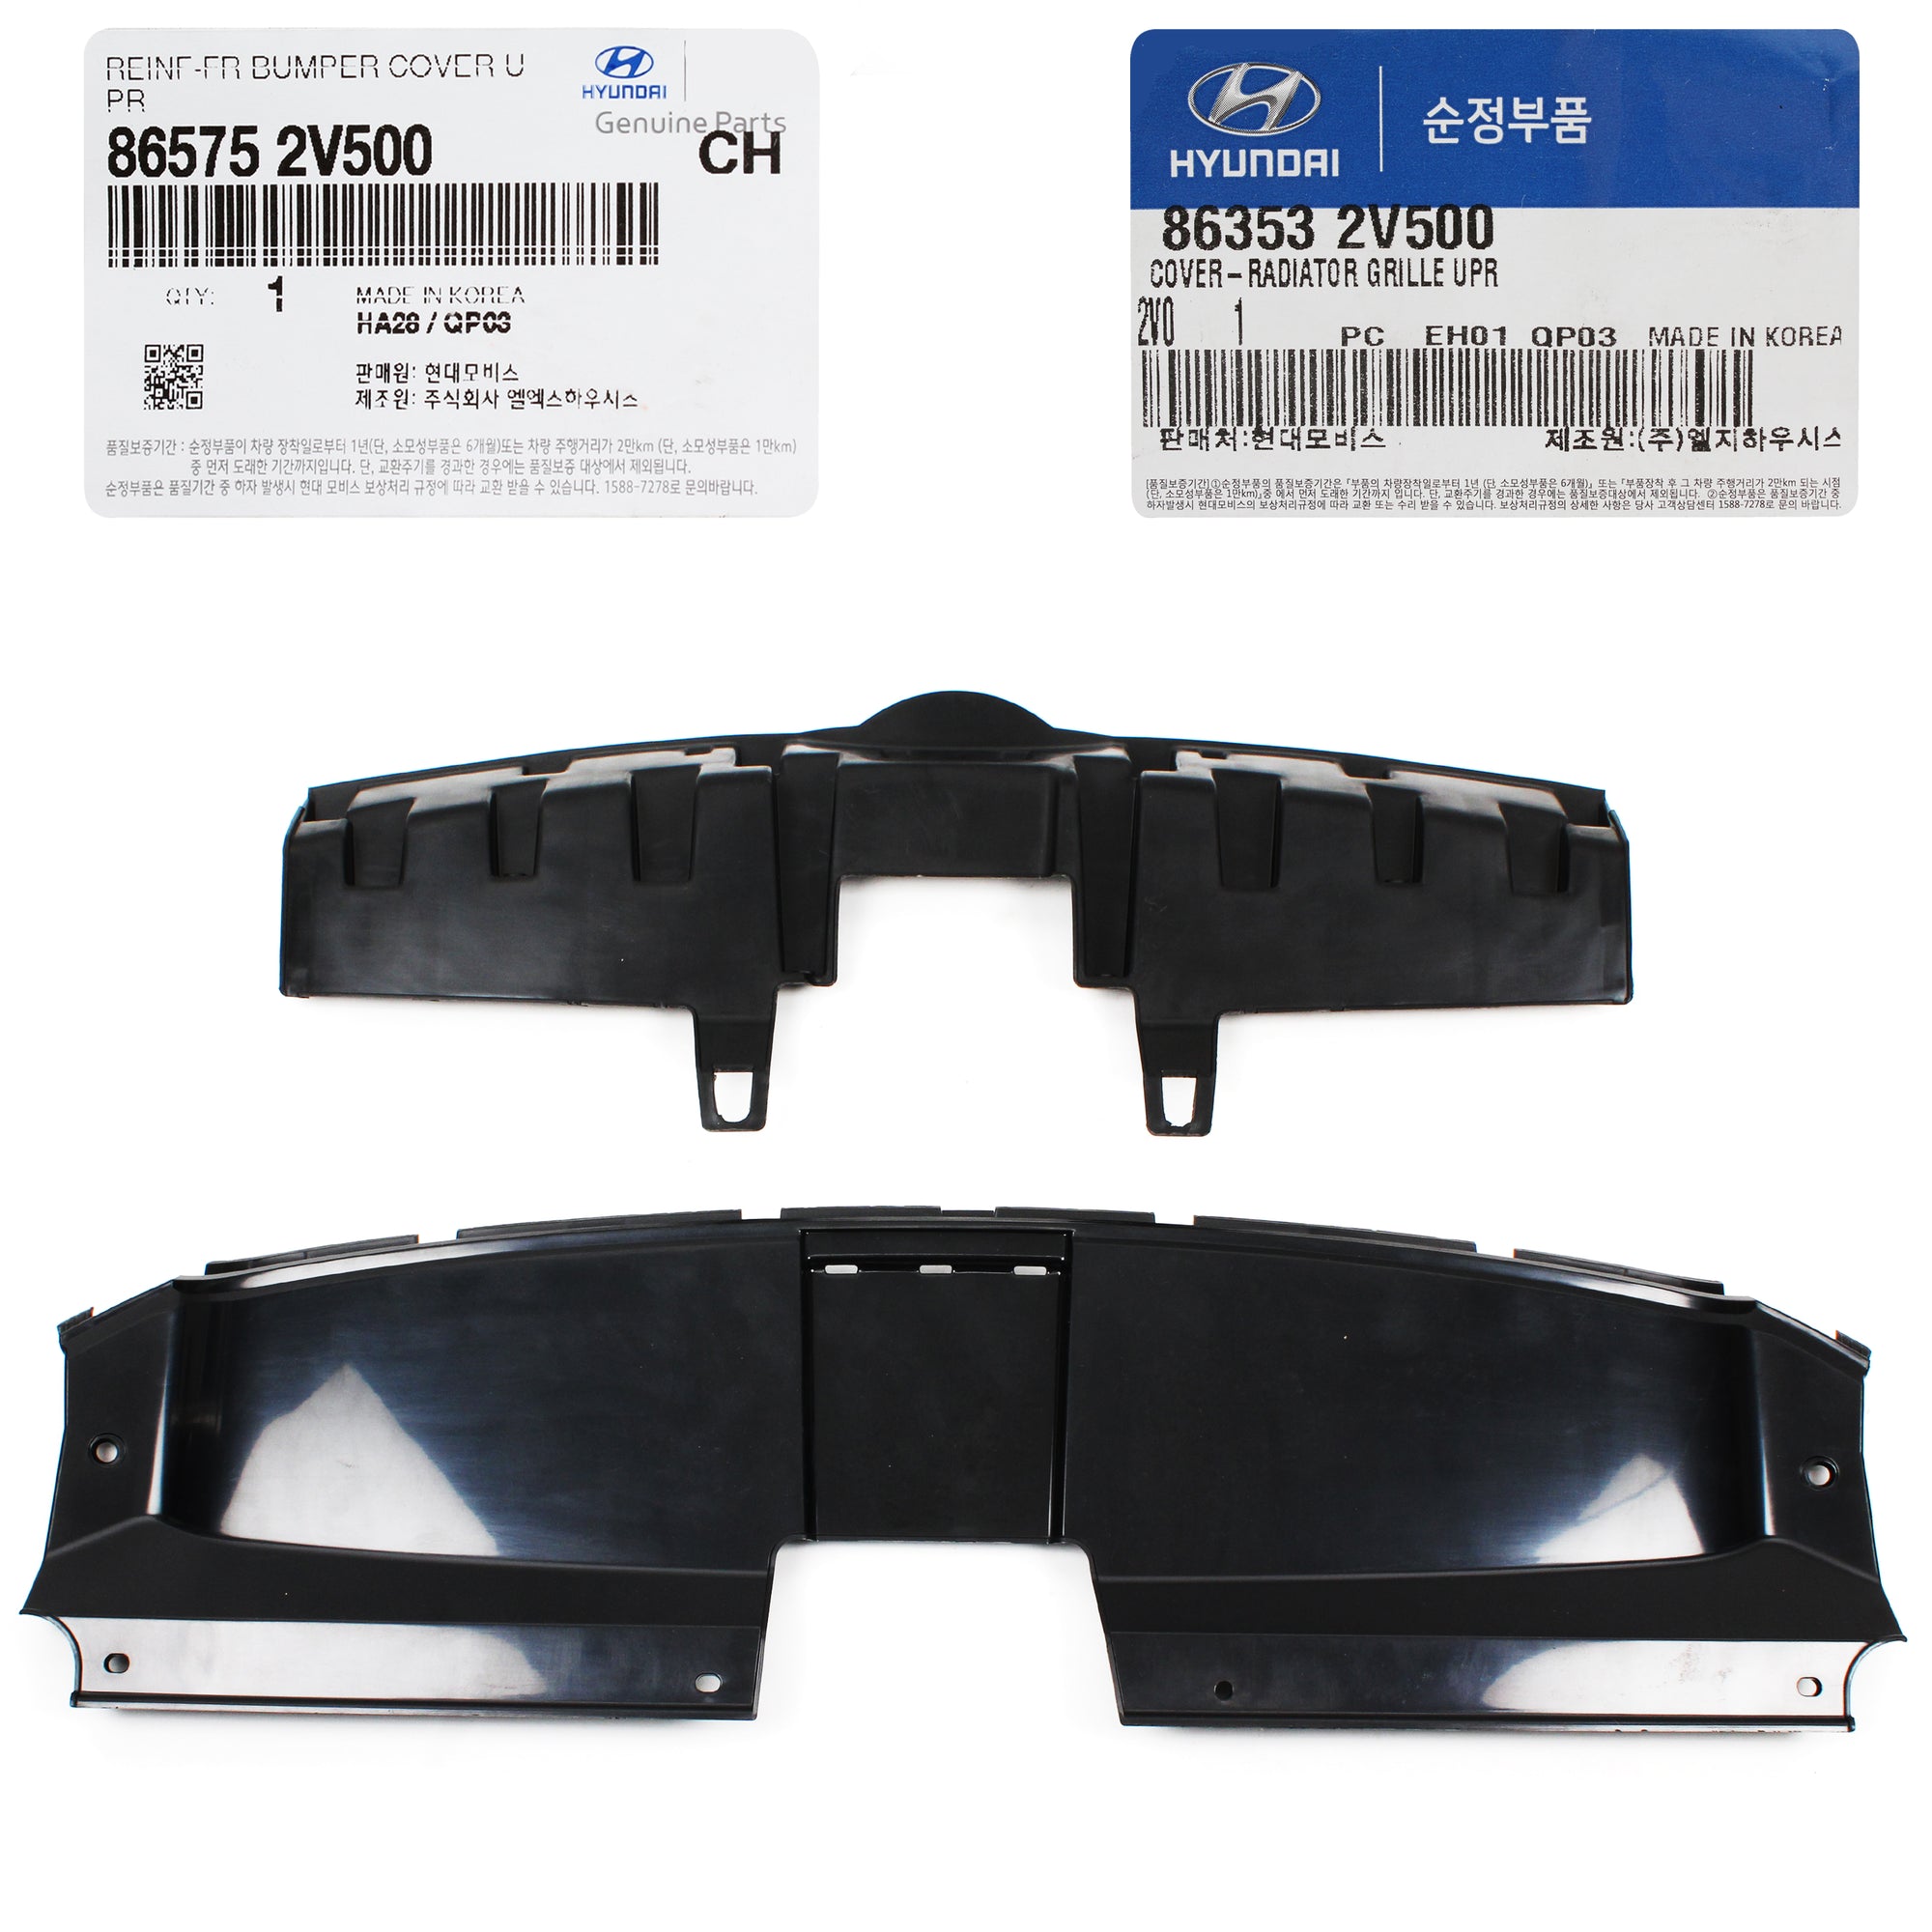 GENUINE Front Grille Sight Shield & Upper Cover for 13-17 Hyundai Veloster Turbo